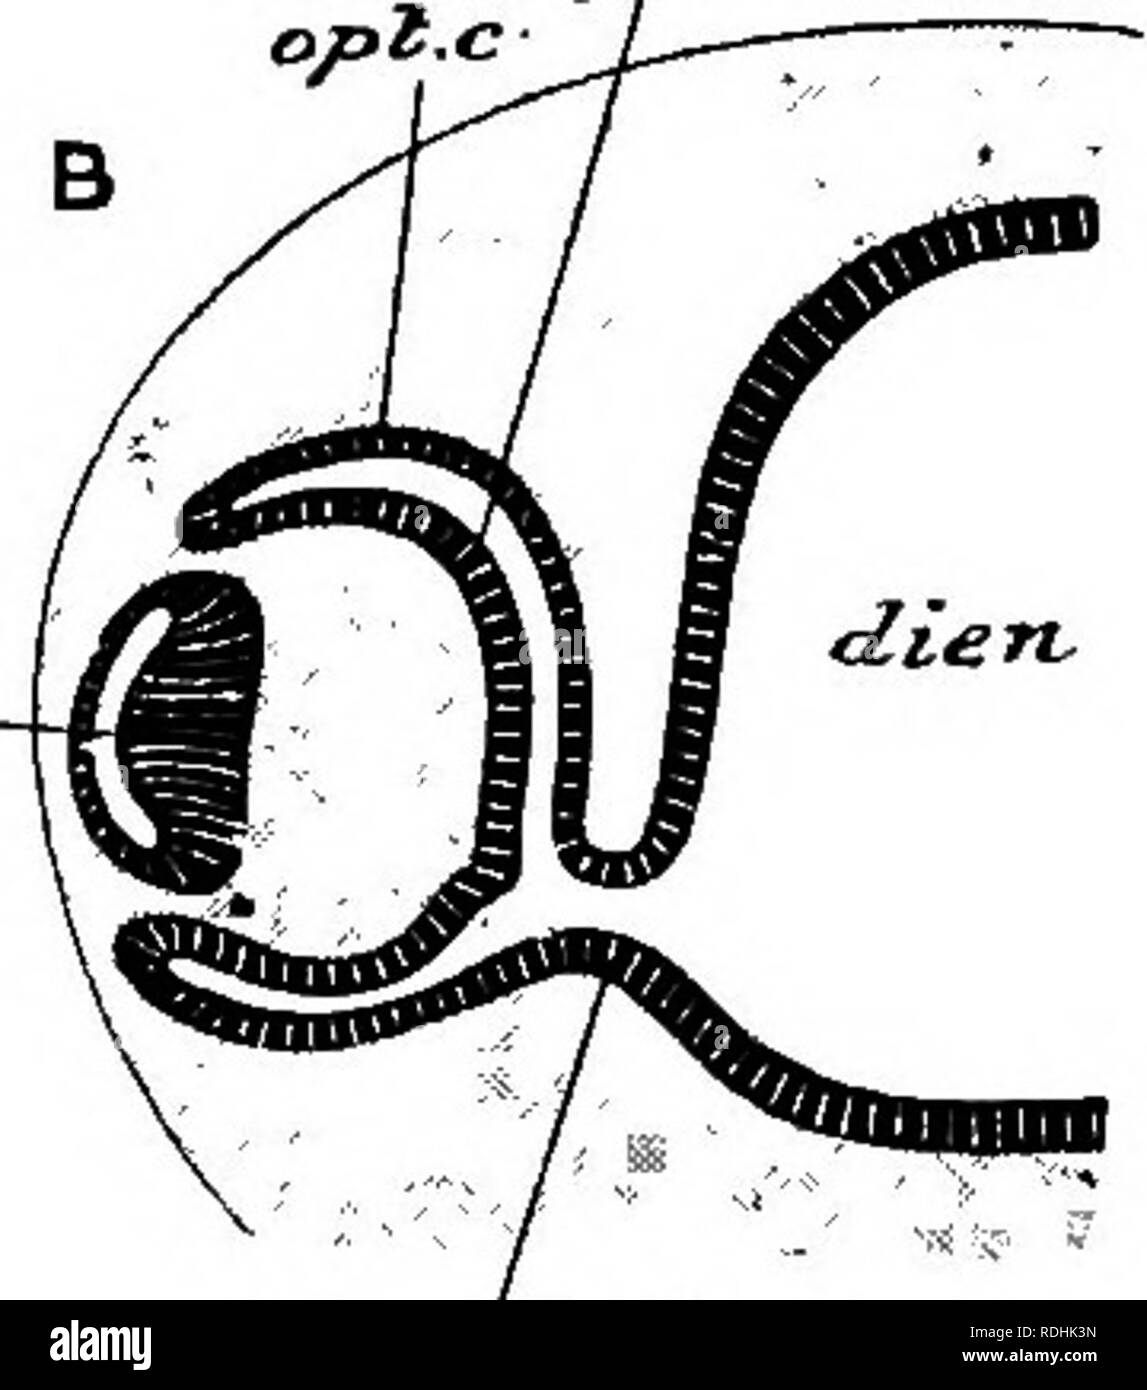 . An elementary course of practical zoology. Zoology. •—/•'J'. Opi.si Fig. 149.—Early (A) and later (B) stages in the development of the eye. dien, diencephalon; inv. I. invagination of ectoderm to form lens ; I. lens ; opt. c outer layer of optic cup ; o^t. d. inner layer ; opi. si. optic stalk ; opt. v. optic vesicle ; ph. pharynx ; pty. pituitary body. (From Parker and Haswell's Zoology altered from Marshall.) the internal nostrils (in air-breathing forms) being developed subsequently. The mode of development of the paired eye of vertebrates is peculiar and characteristic. At an early stage Stock Photo